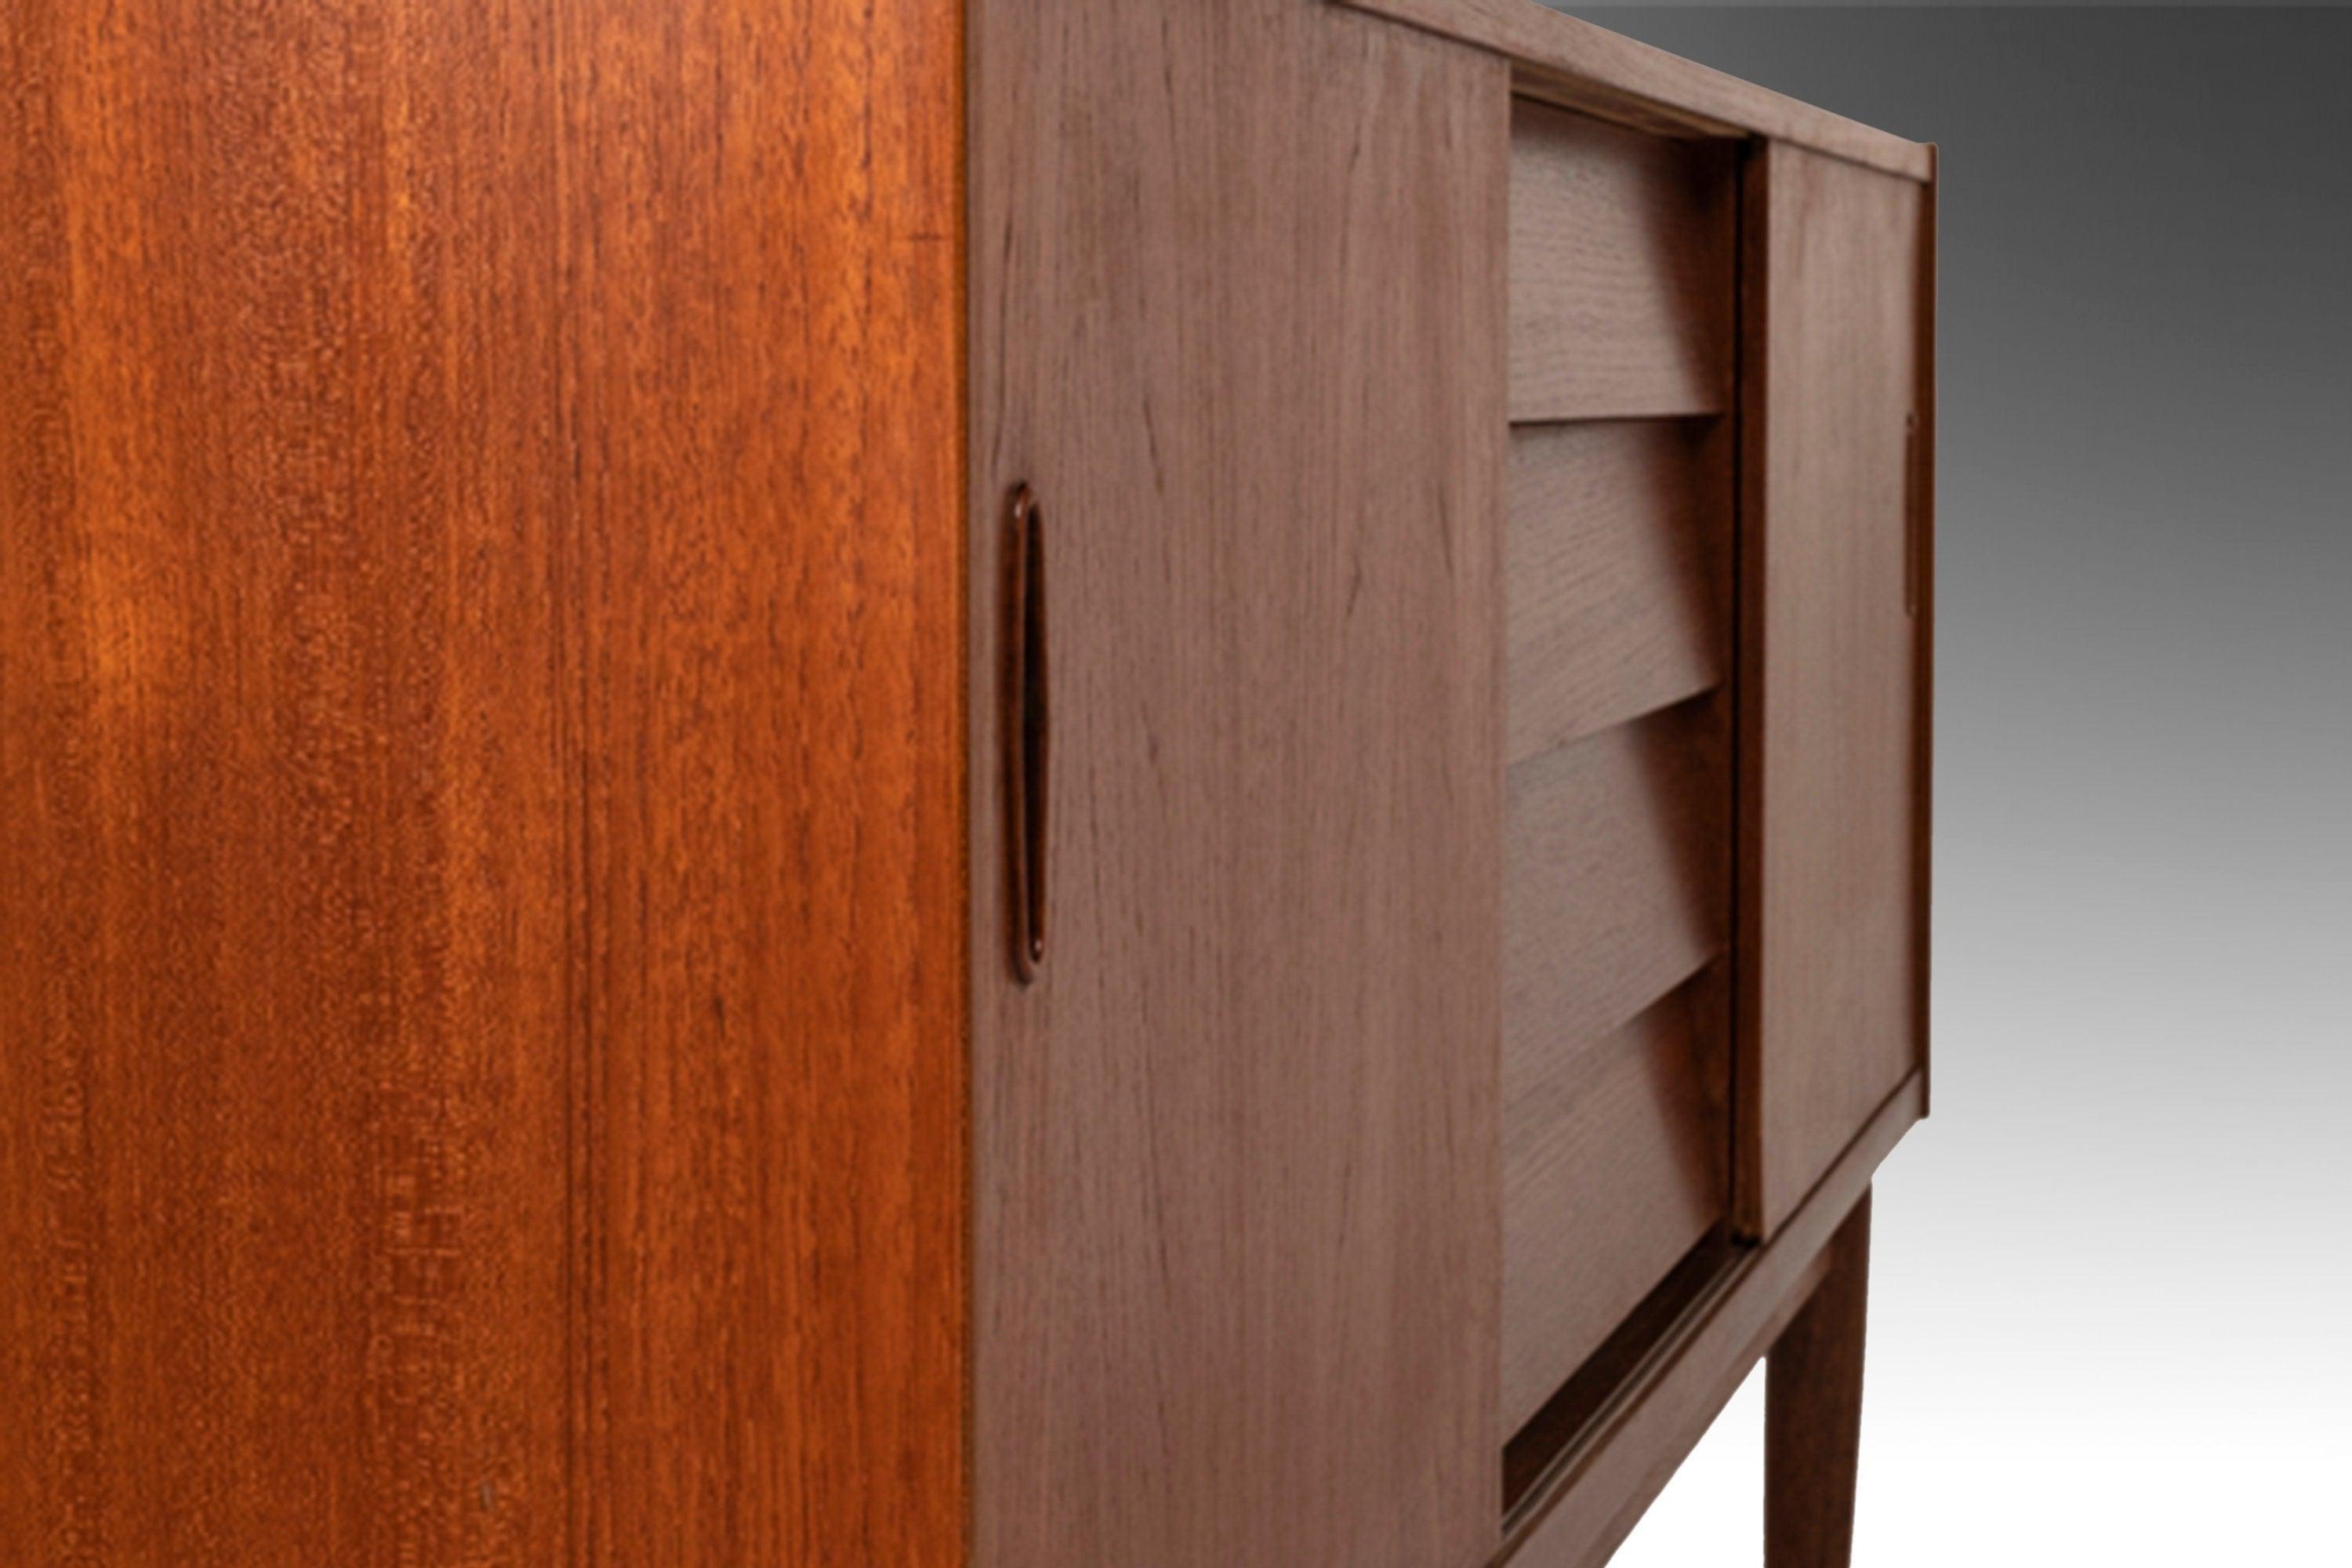 As functional as it is visually striking this gorgeous credenza, designed by the renowned Nils Jonsson for Hugo Troeds, is an exceptional example of Scandinavian Minimalist design. Constructed of teak with exceptional woodgrains this sideboard